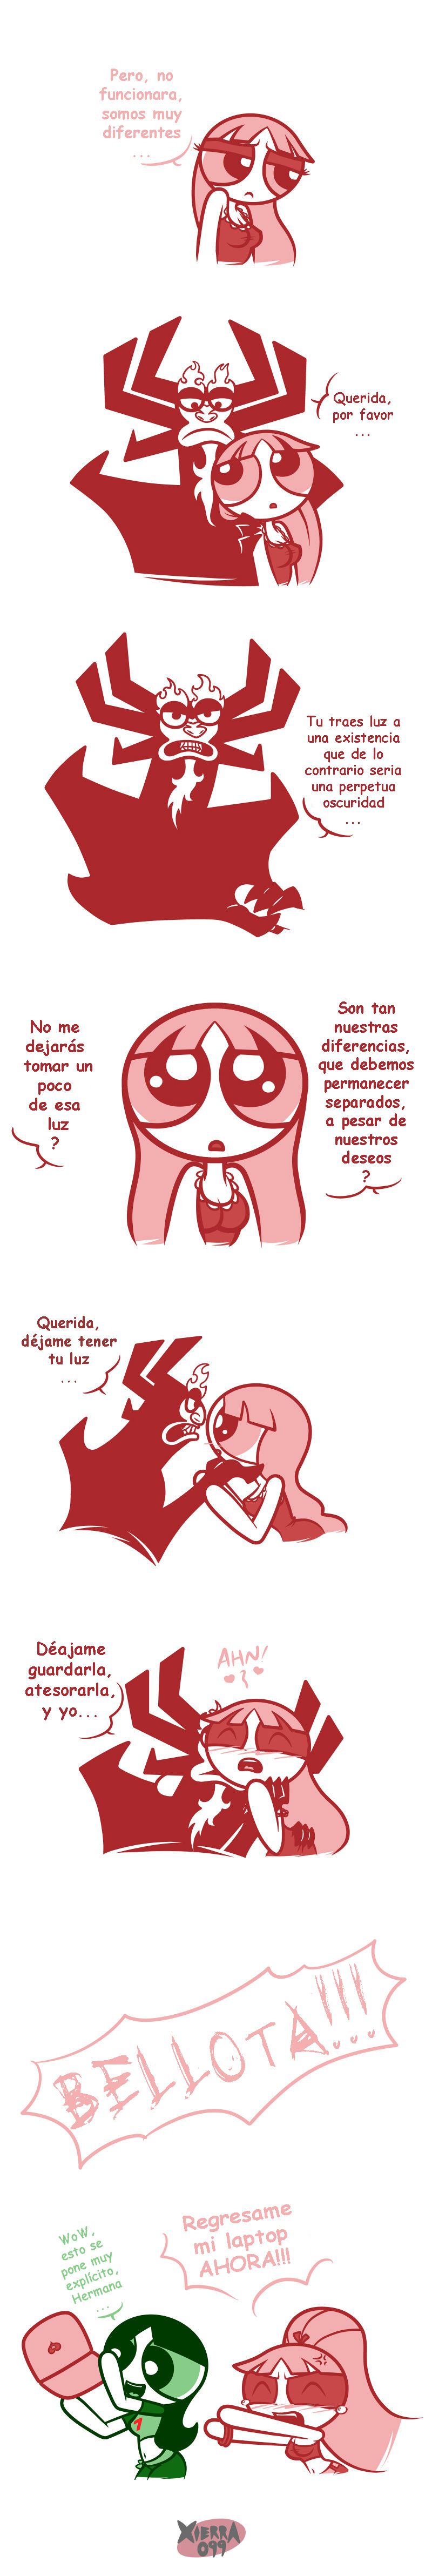 [Xierra099] PPG Strips [Ongoing] Spanish 16